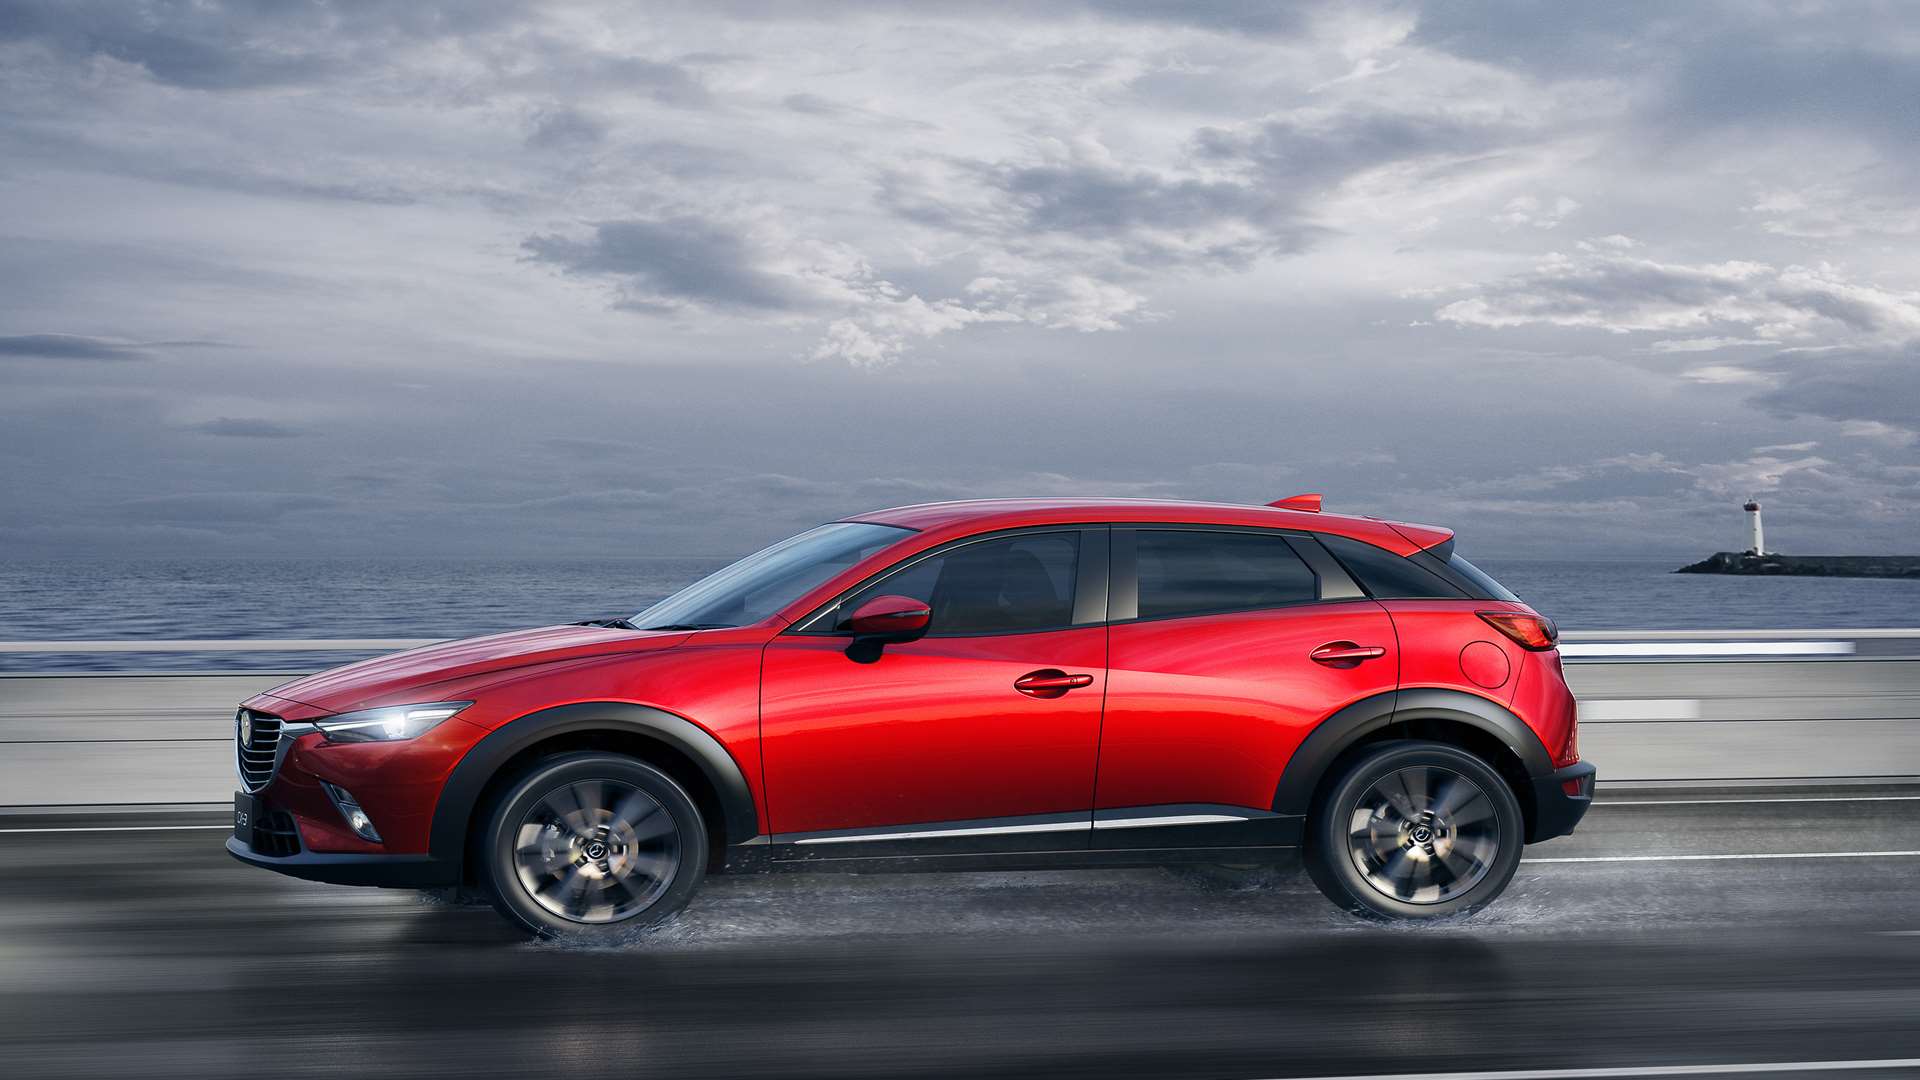 The KODO design language is at its most alluring on the CX-3